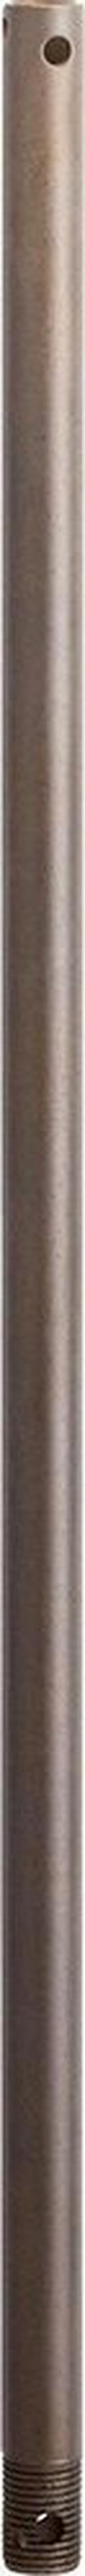 24 in. Universal Thermostat Downrod in Oil Rubbed Bronze